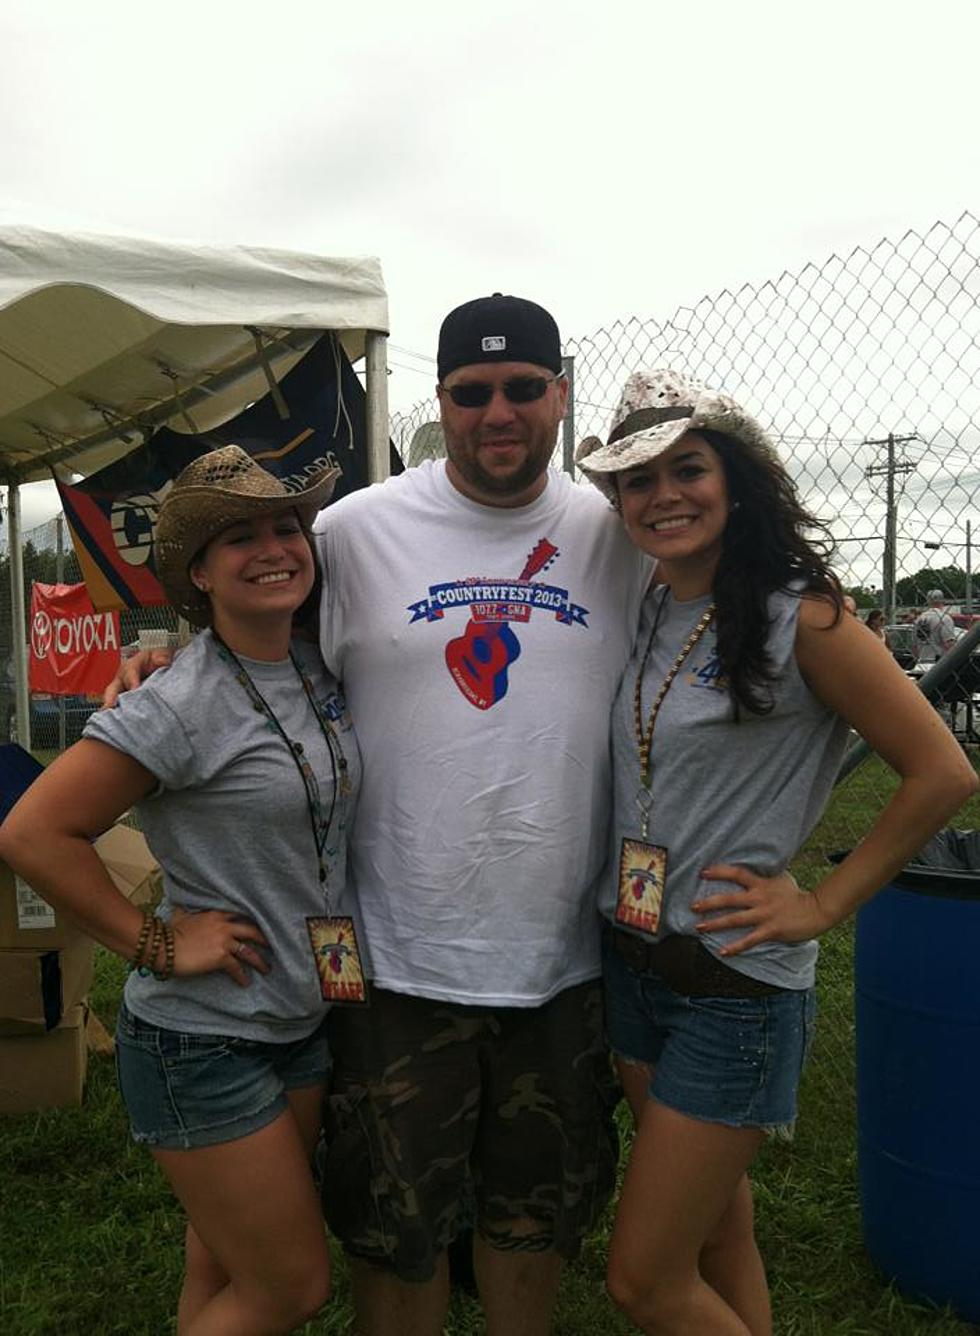 Countryfest Means Levack and Hot Chicks!